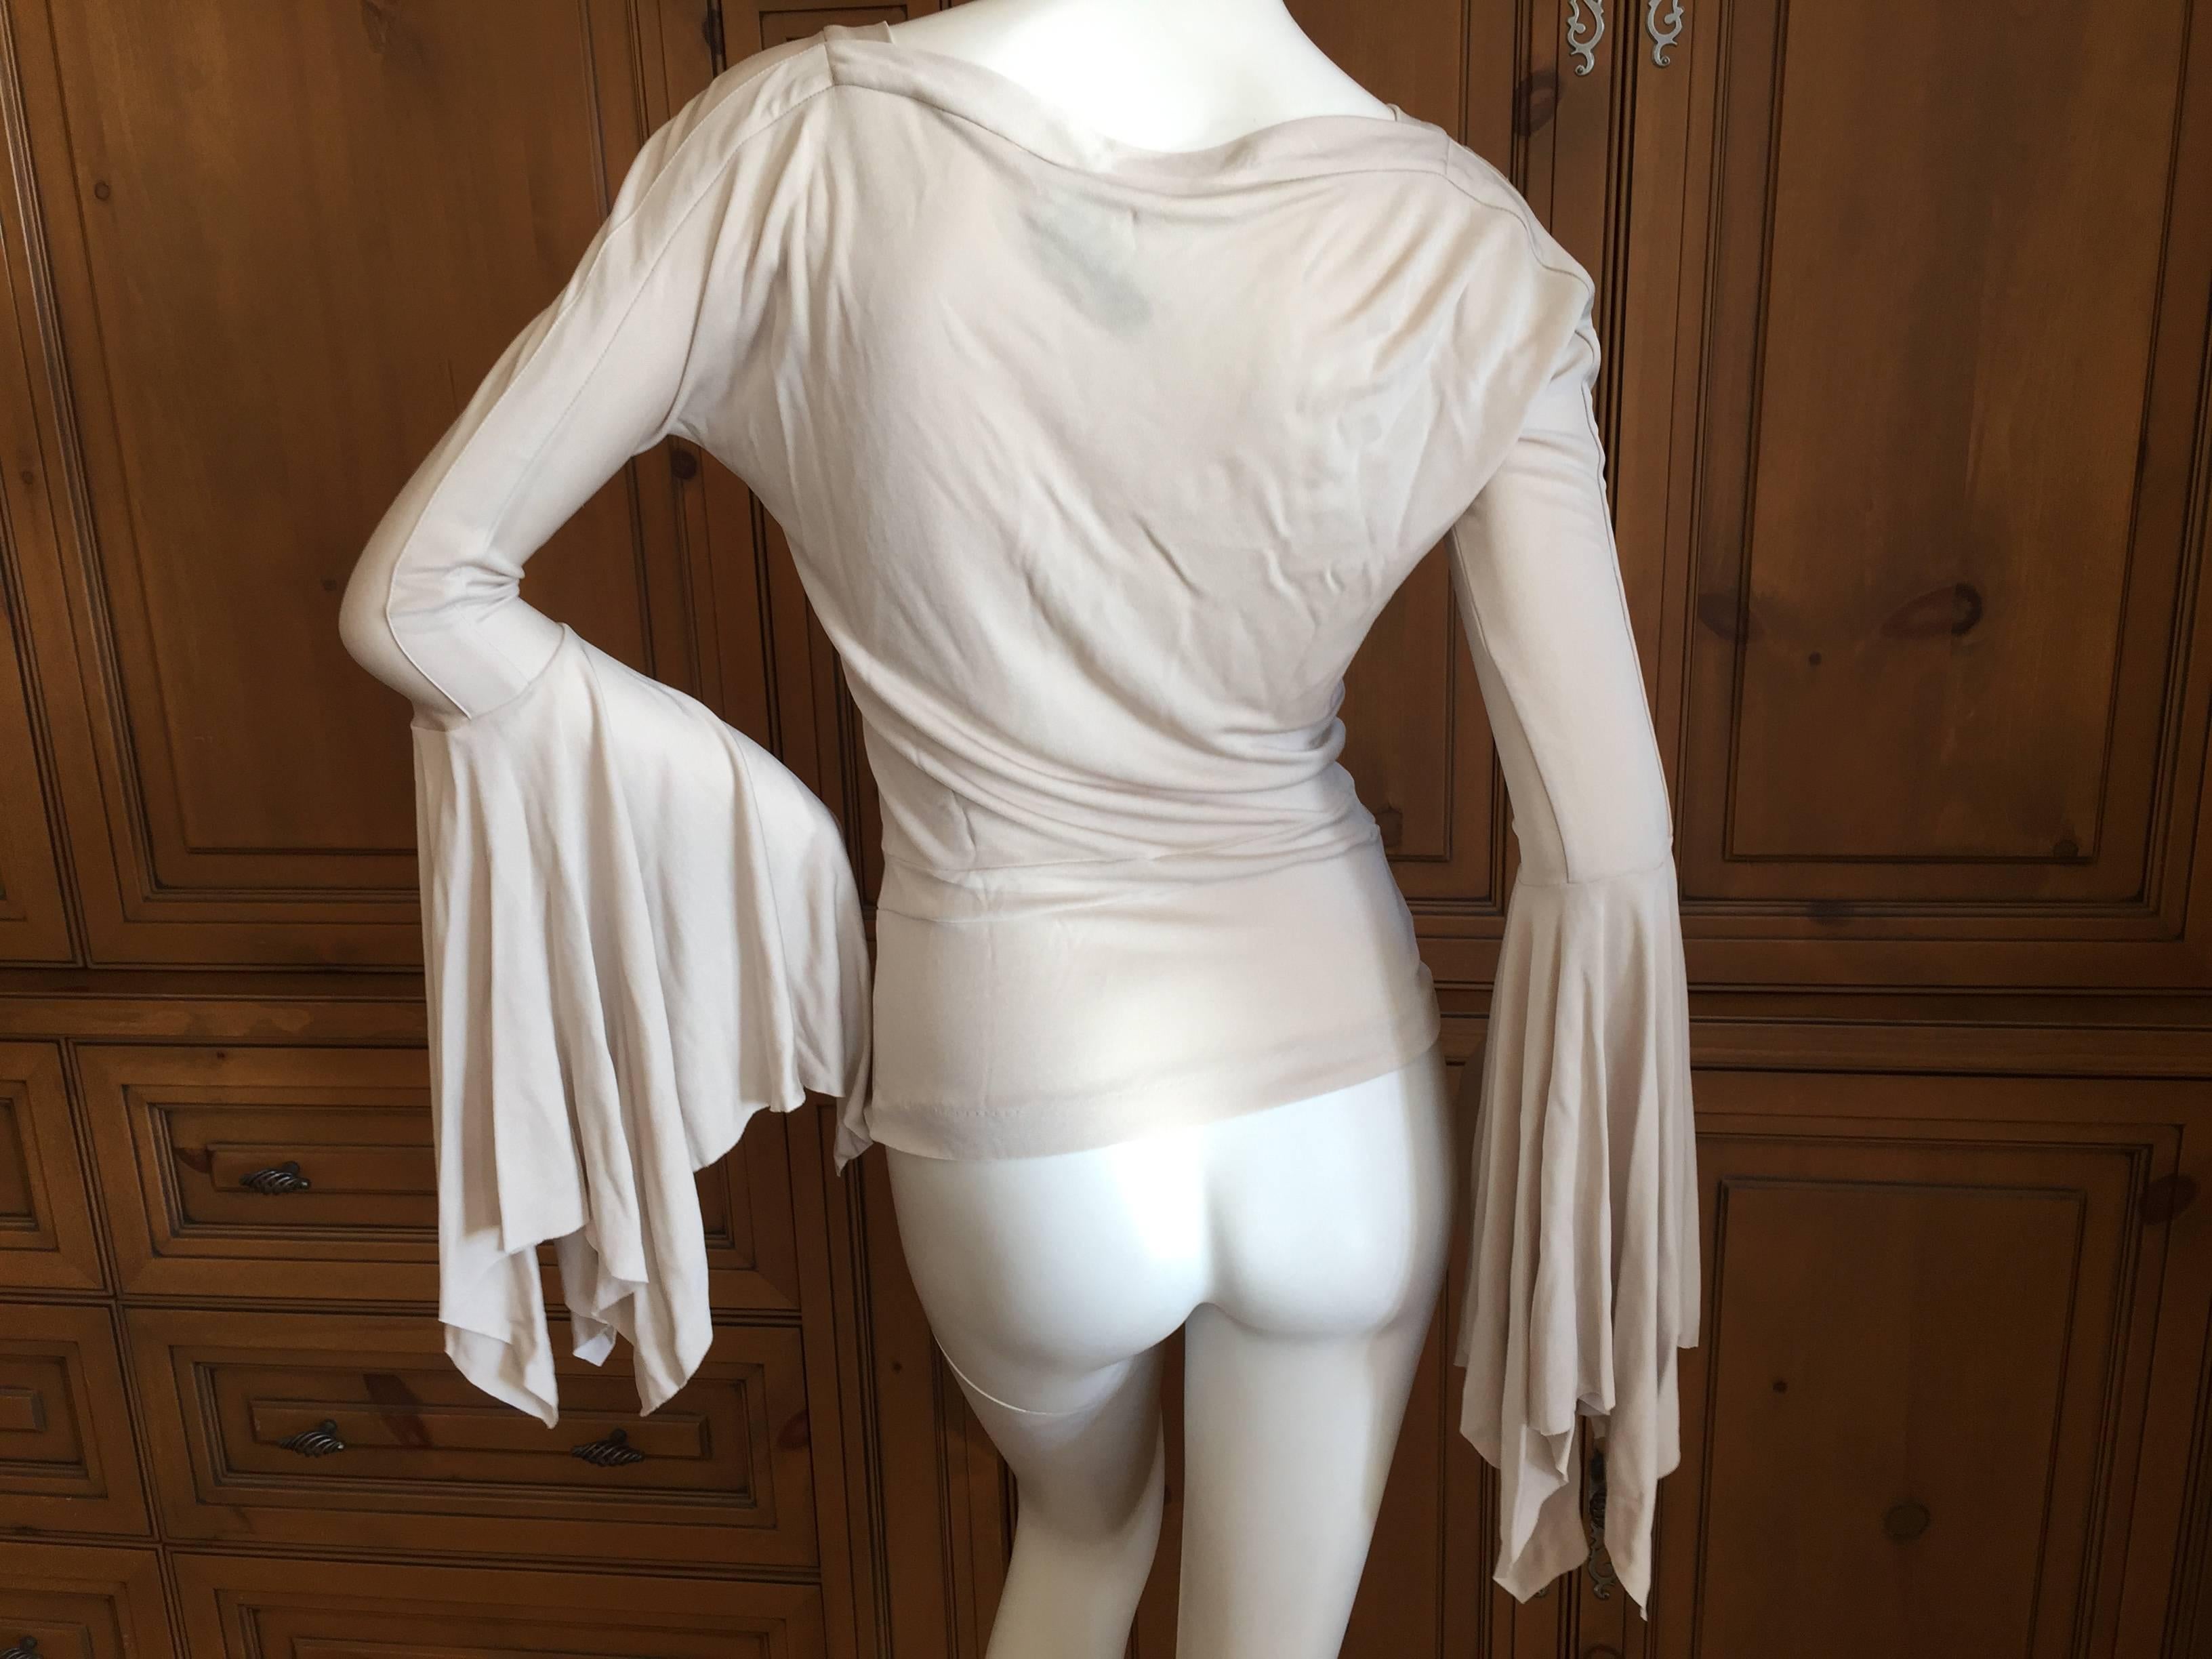 Tom Ford Yves Saint Laurent Bell Sleeve Festival Top In Excellent Condition For Sale In Cloverdale, CA